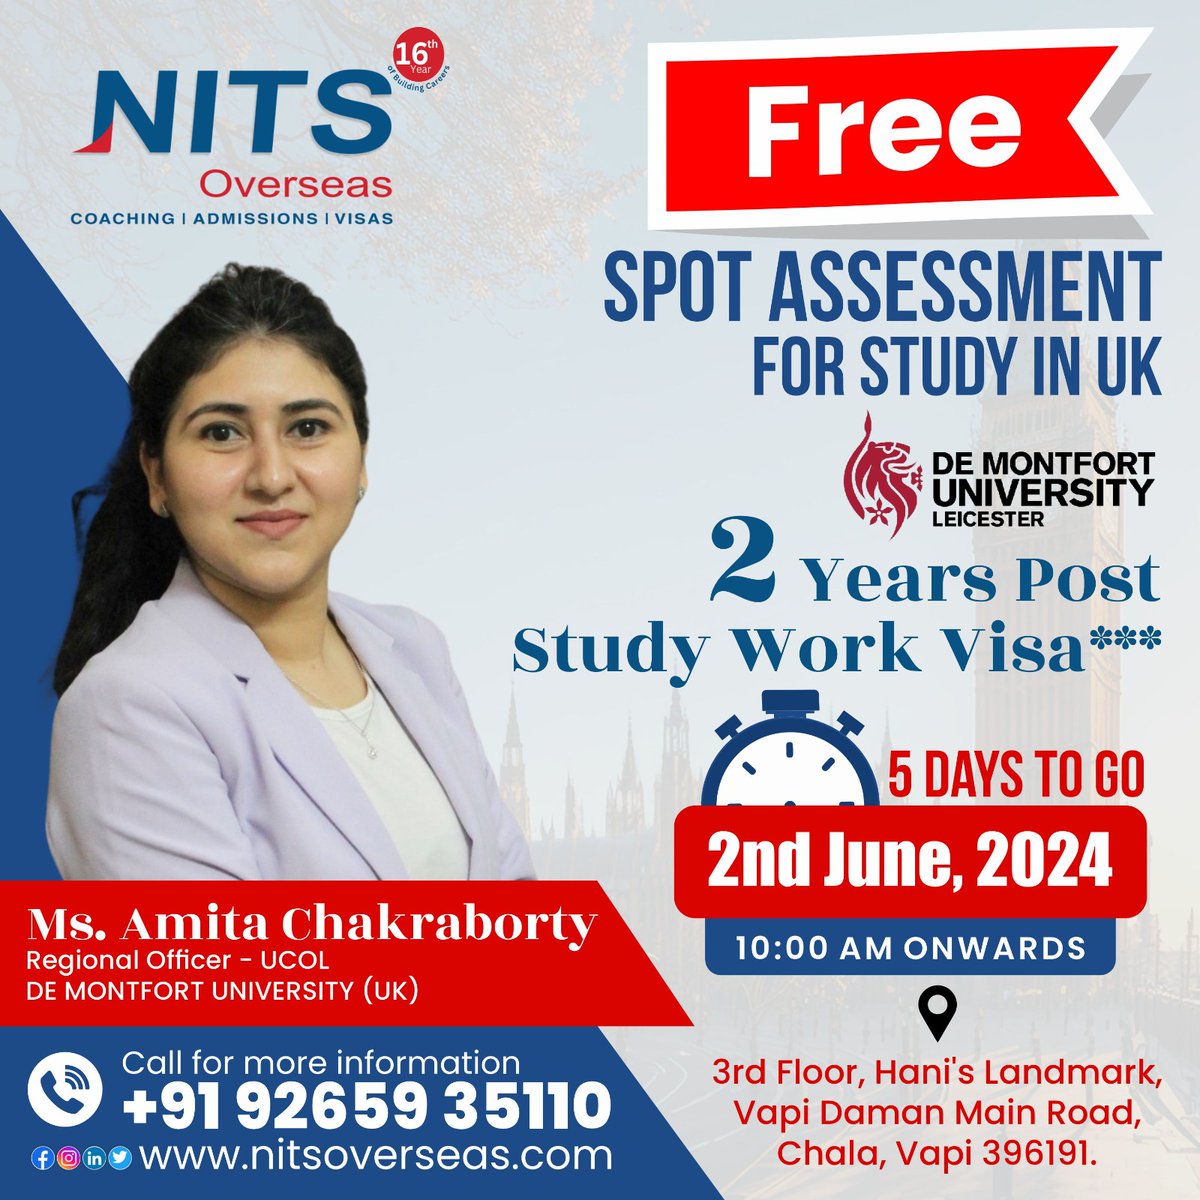 🎓5 days to go! Your gateway to De Montfort University Leicester awaits! Join us on 02 June 2024 at 10:00 AM for the FREE! Spot admissions assessment. Meet Ms. Amita Chakraborty and unlock the possibilities of the 2-year post-study work visa!

📞: +91 92659 35110

#nitsoverseas